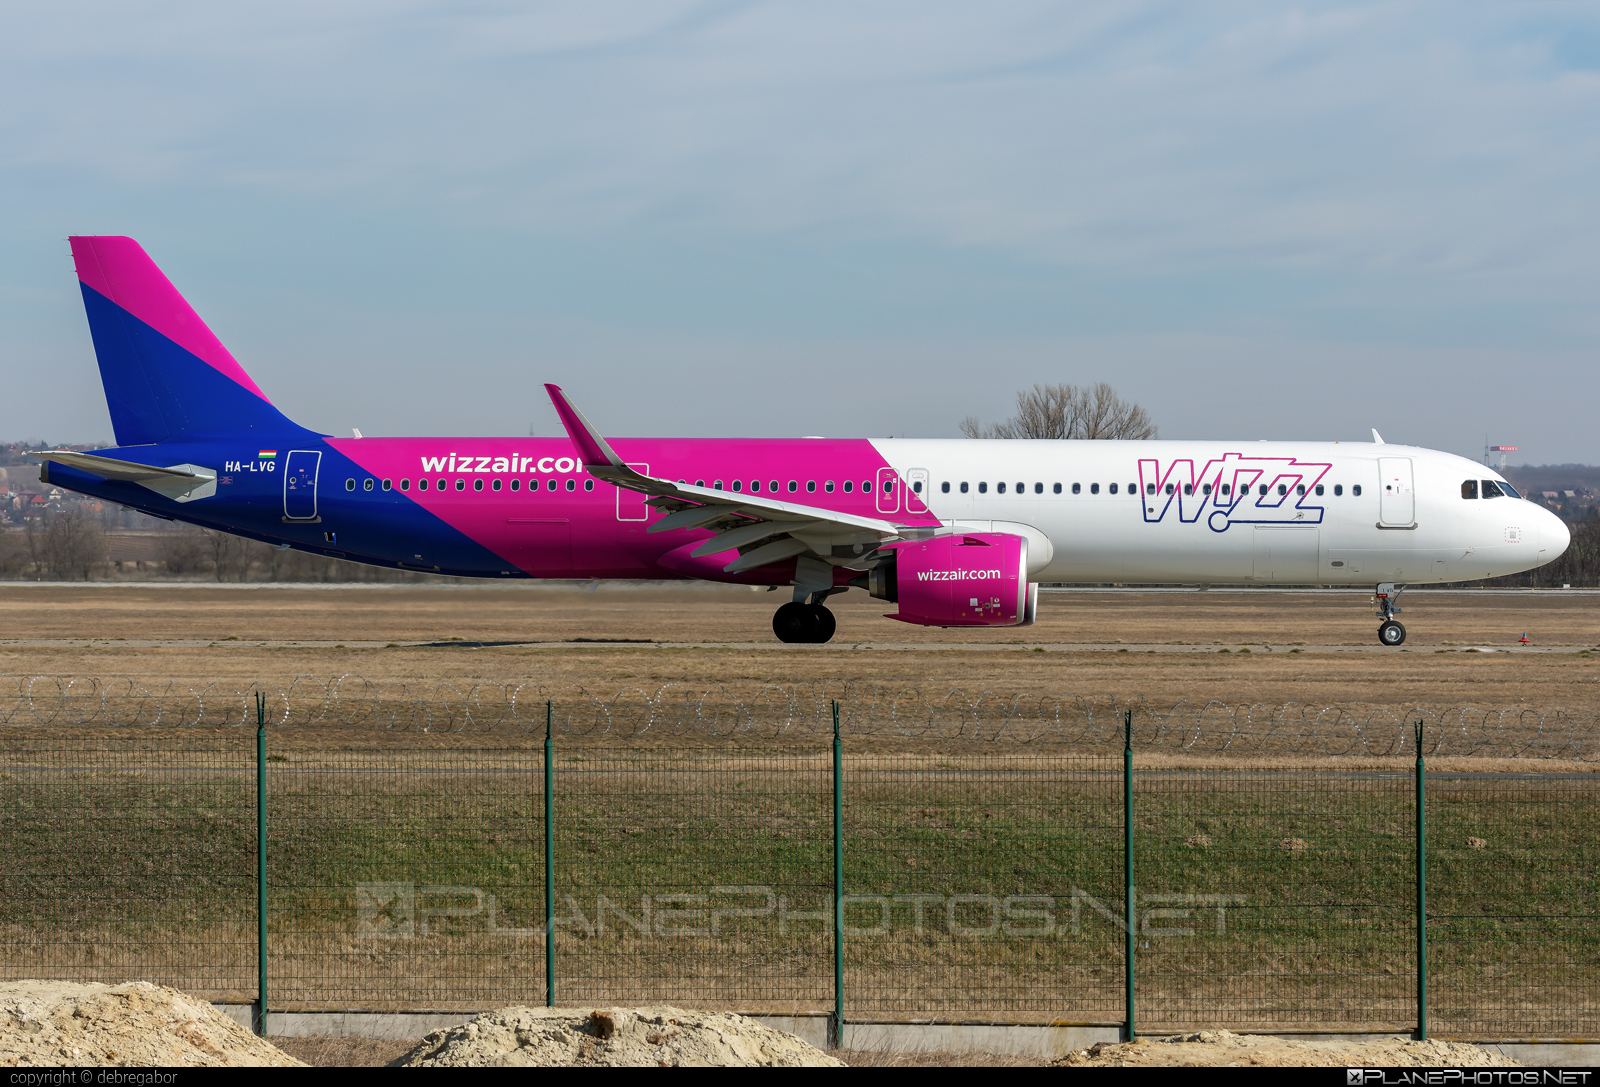 Airbus A320-271N - HA-LVG operated by Wizz Air #a320 #a320family #a320neo #airbus #airbus320 #wizz #wizzair